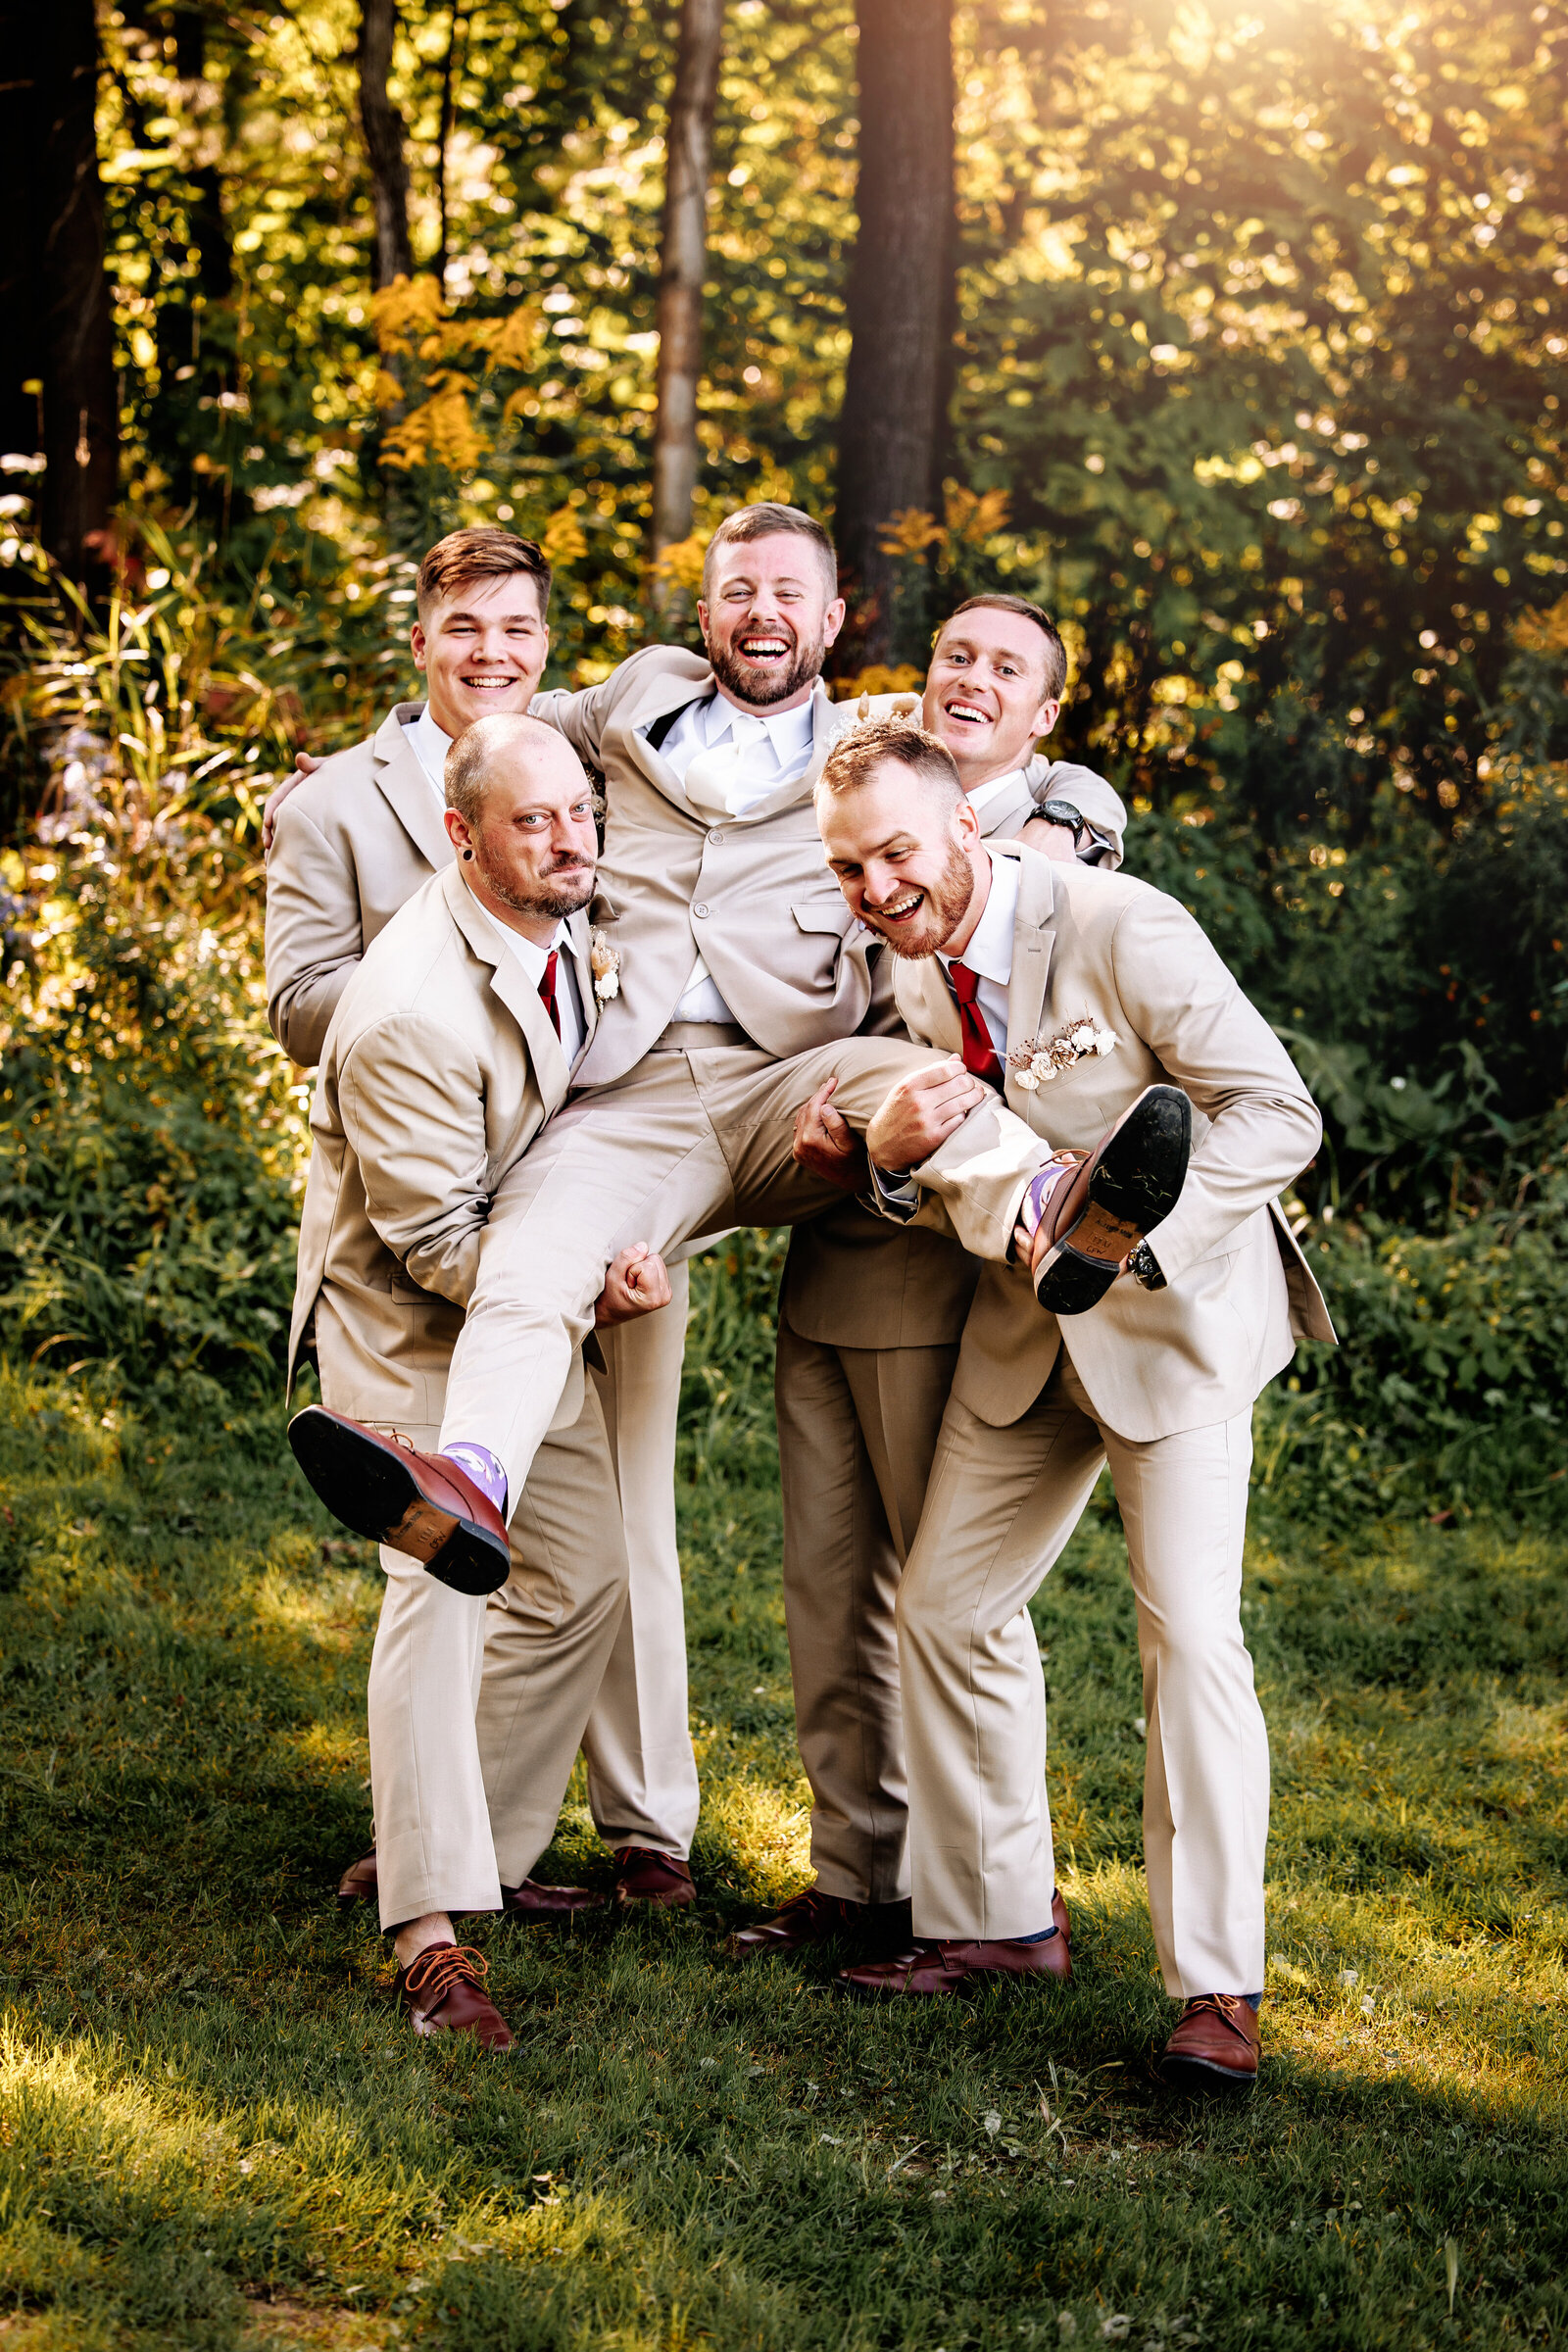 Groomsman hold groom up for a funny wedding portrait